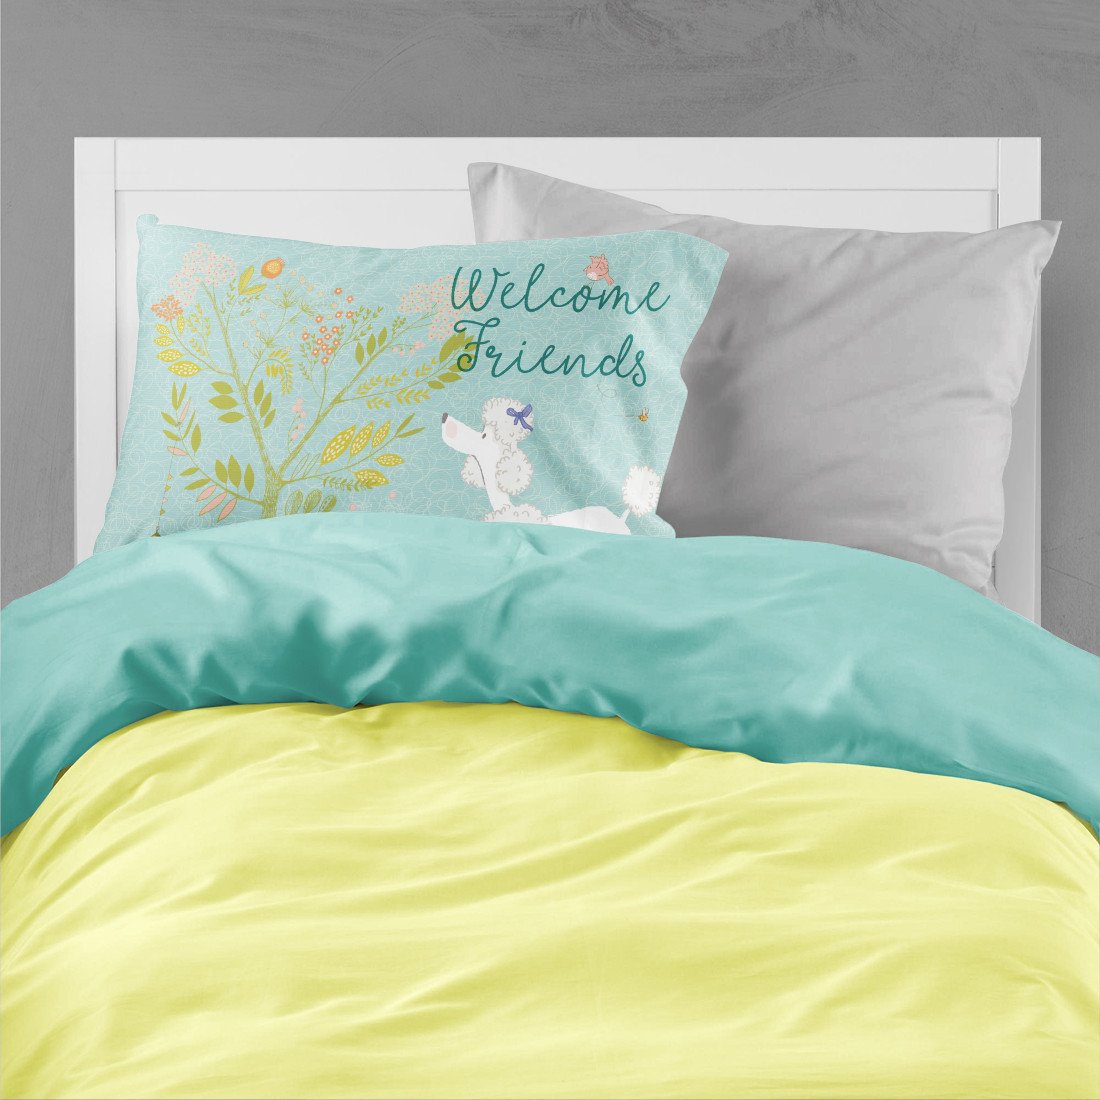 Welcome Friends White Poodle Fabric Standard Pillowcase BB7614PILLOWCASE by Caroline's Treasures